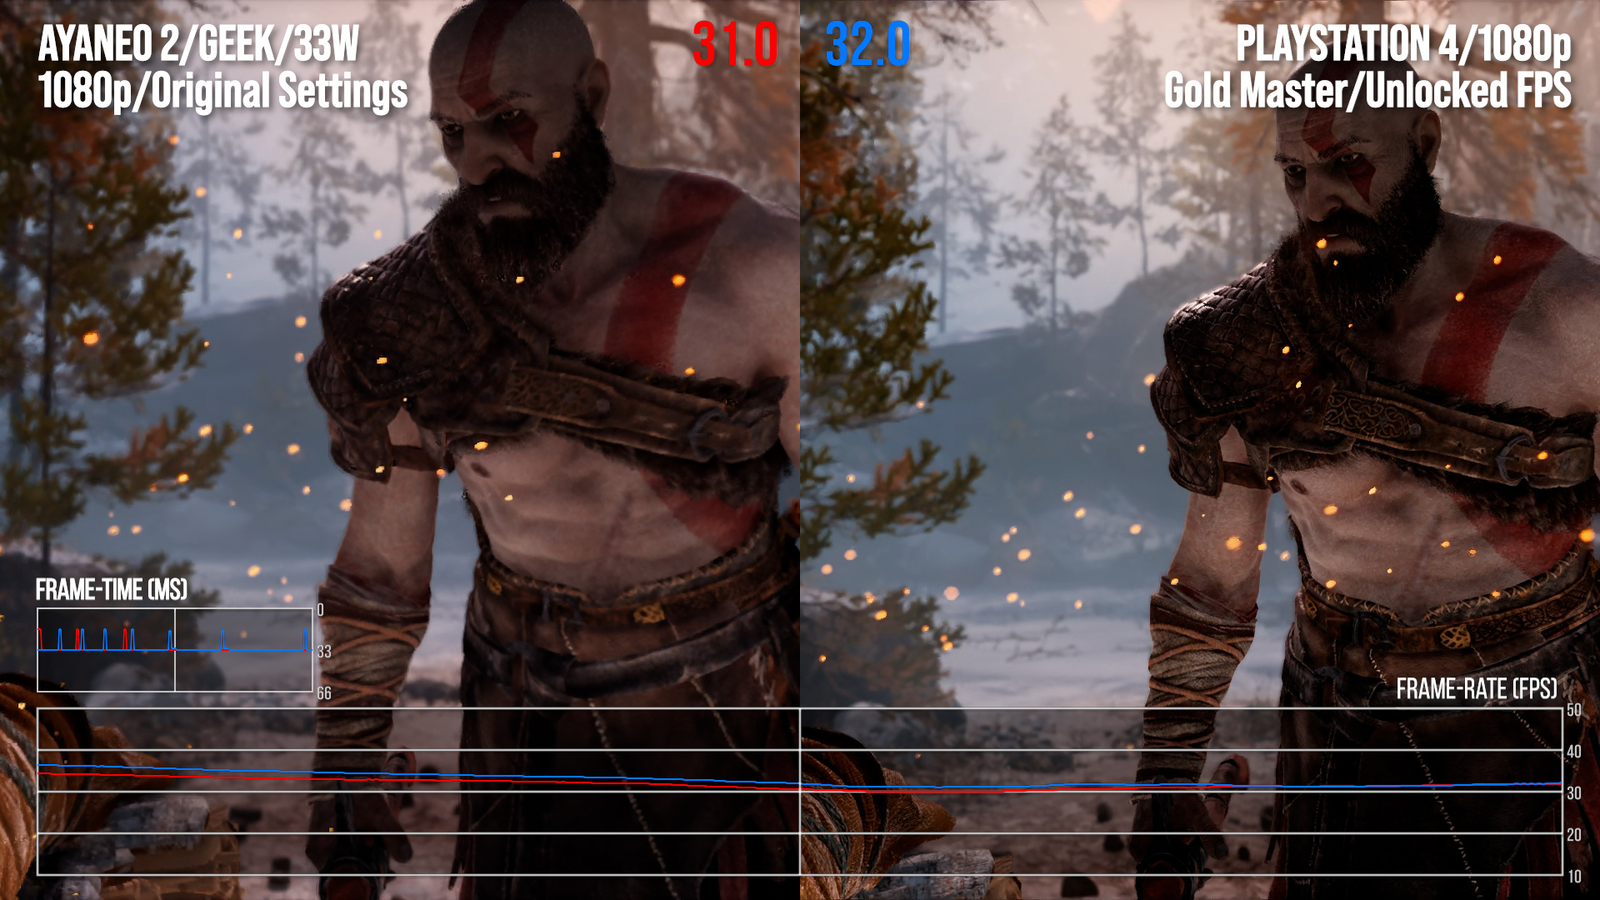 God of War PC Original Settings vs. PS4 - Is There a Difference?